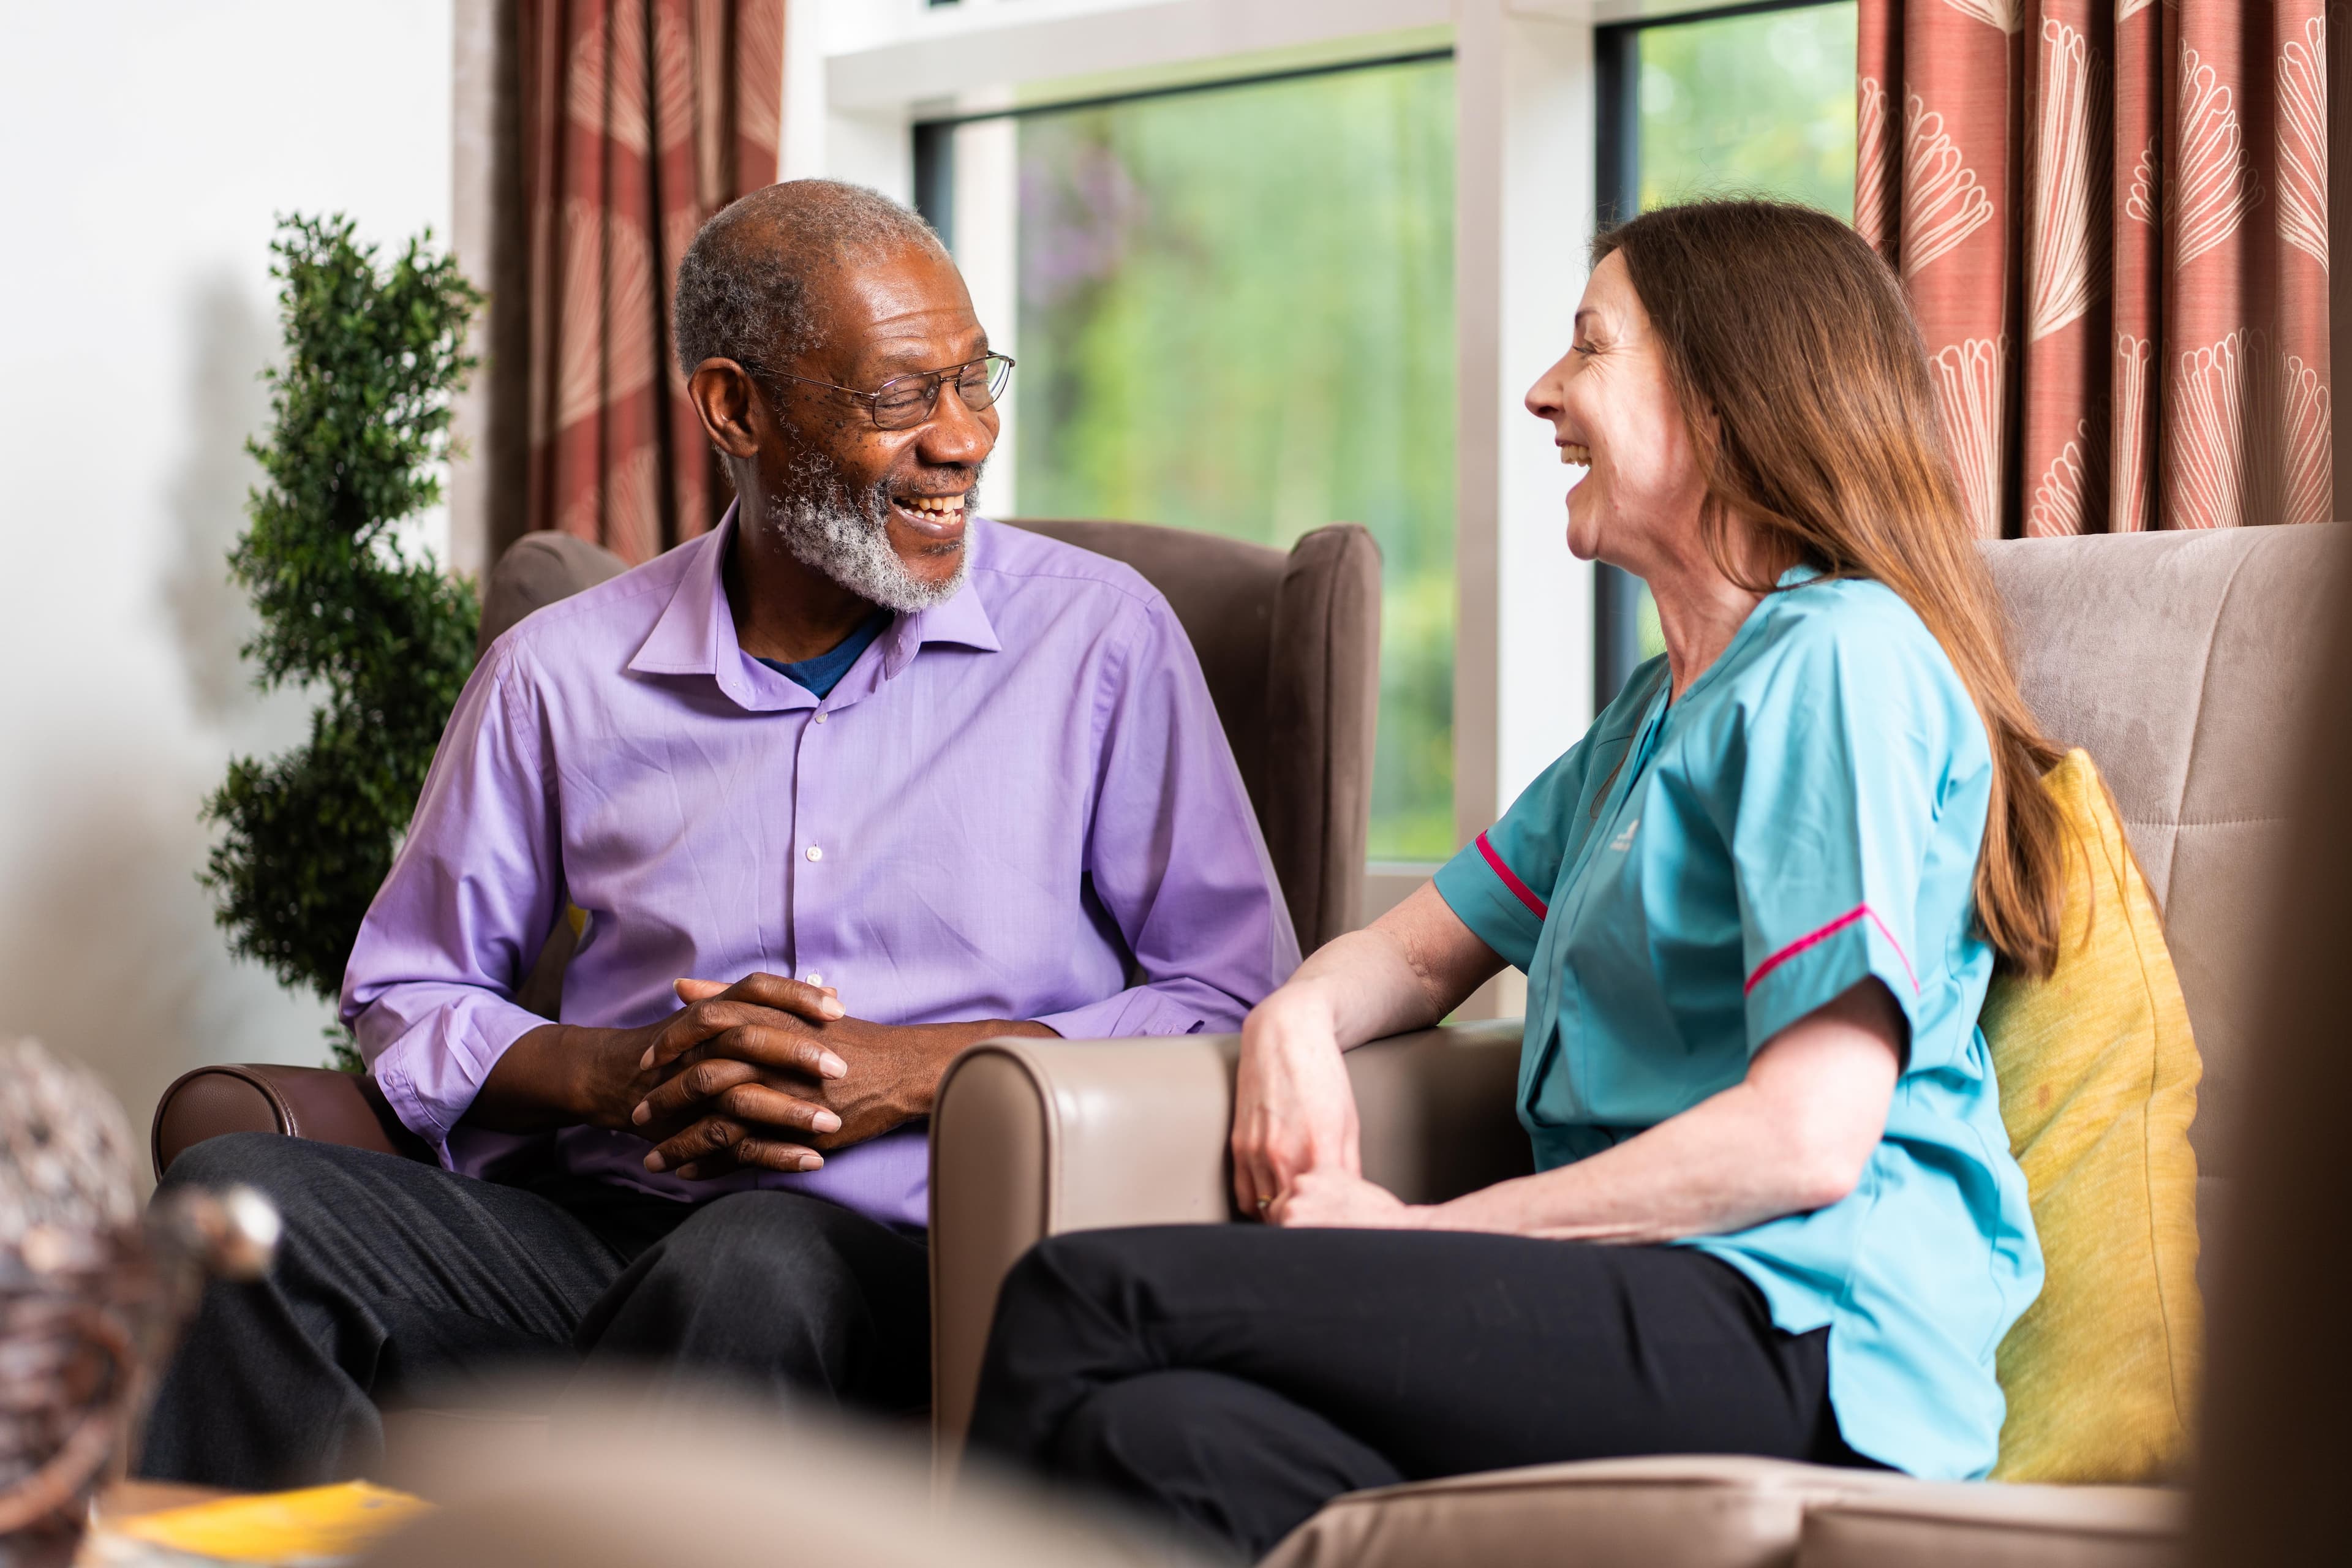 Older man with grey hair wearing a purple shirt and sat in an armchair laughing with female care assistant